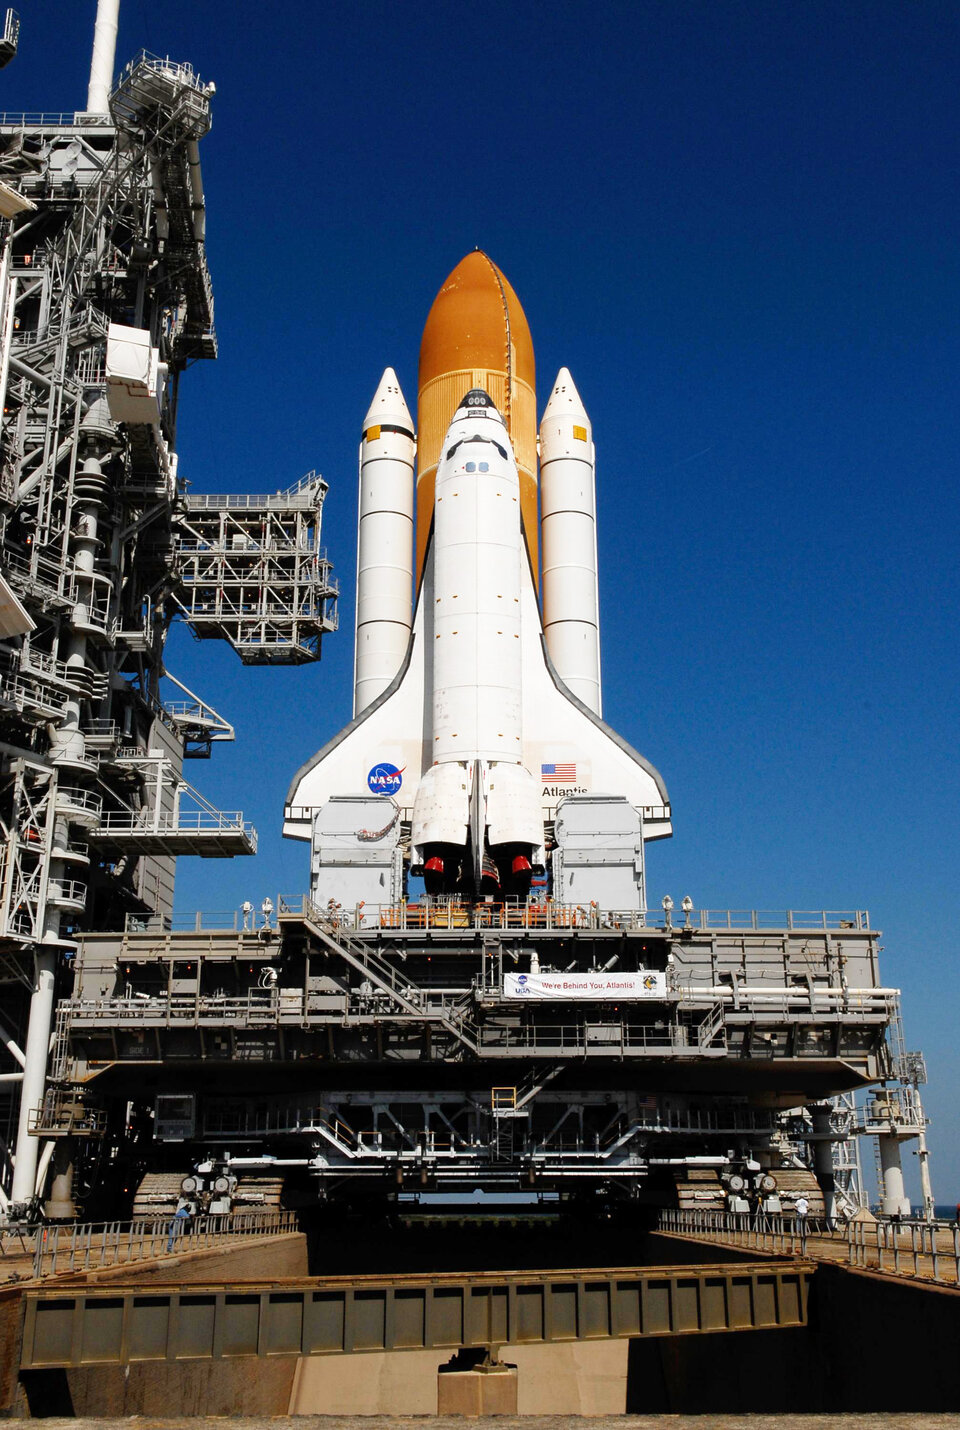 Columbus is set to launch on board Space Shuttle Atlantis on 6 December